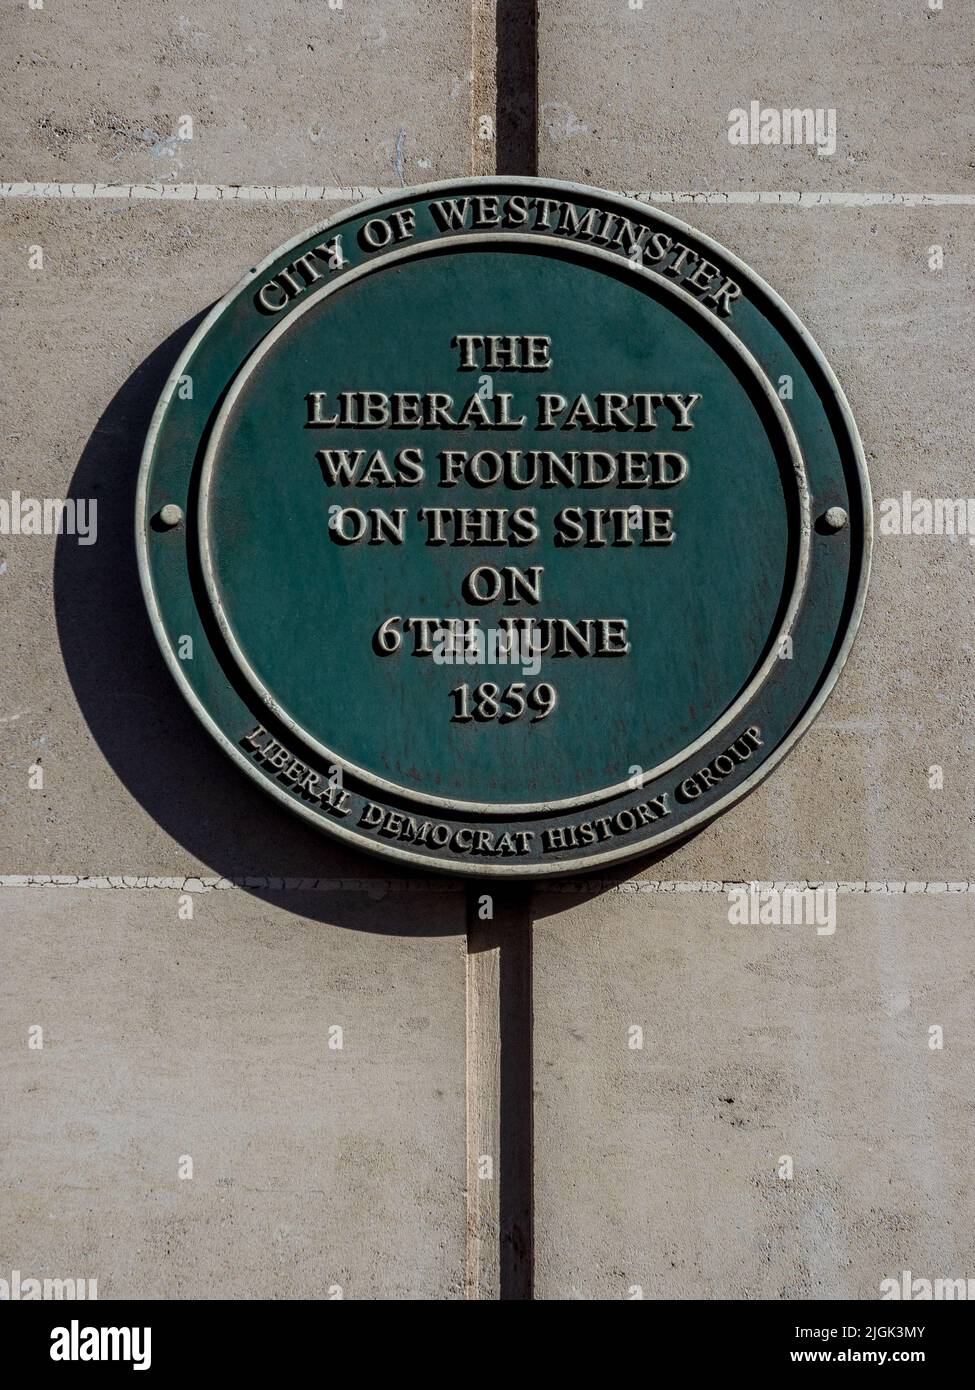 The Liberal Party was founded at Almack's Club on this site 6th of June 1859. Memorial Plaque by City of Westminster & Liberal Democrat History Group Stock Photo